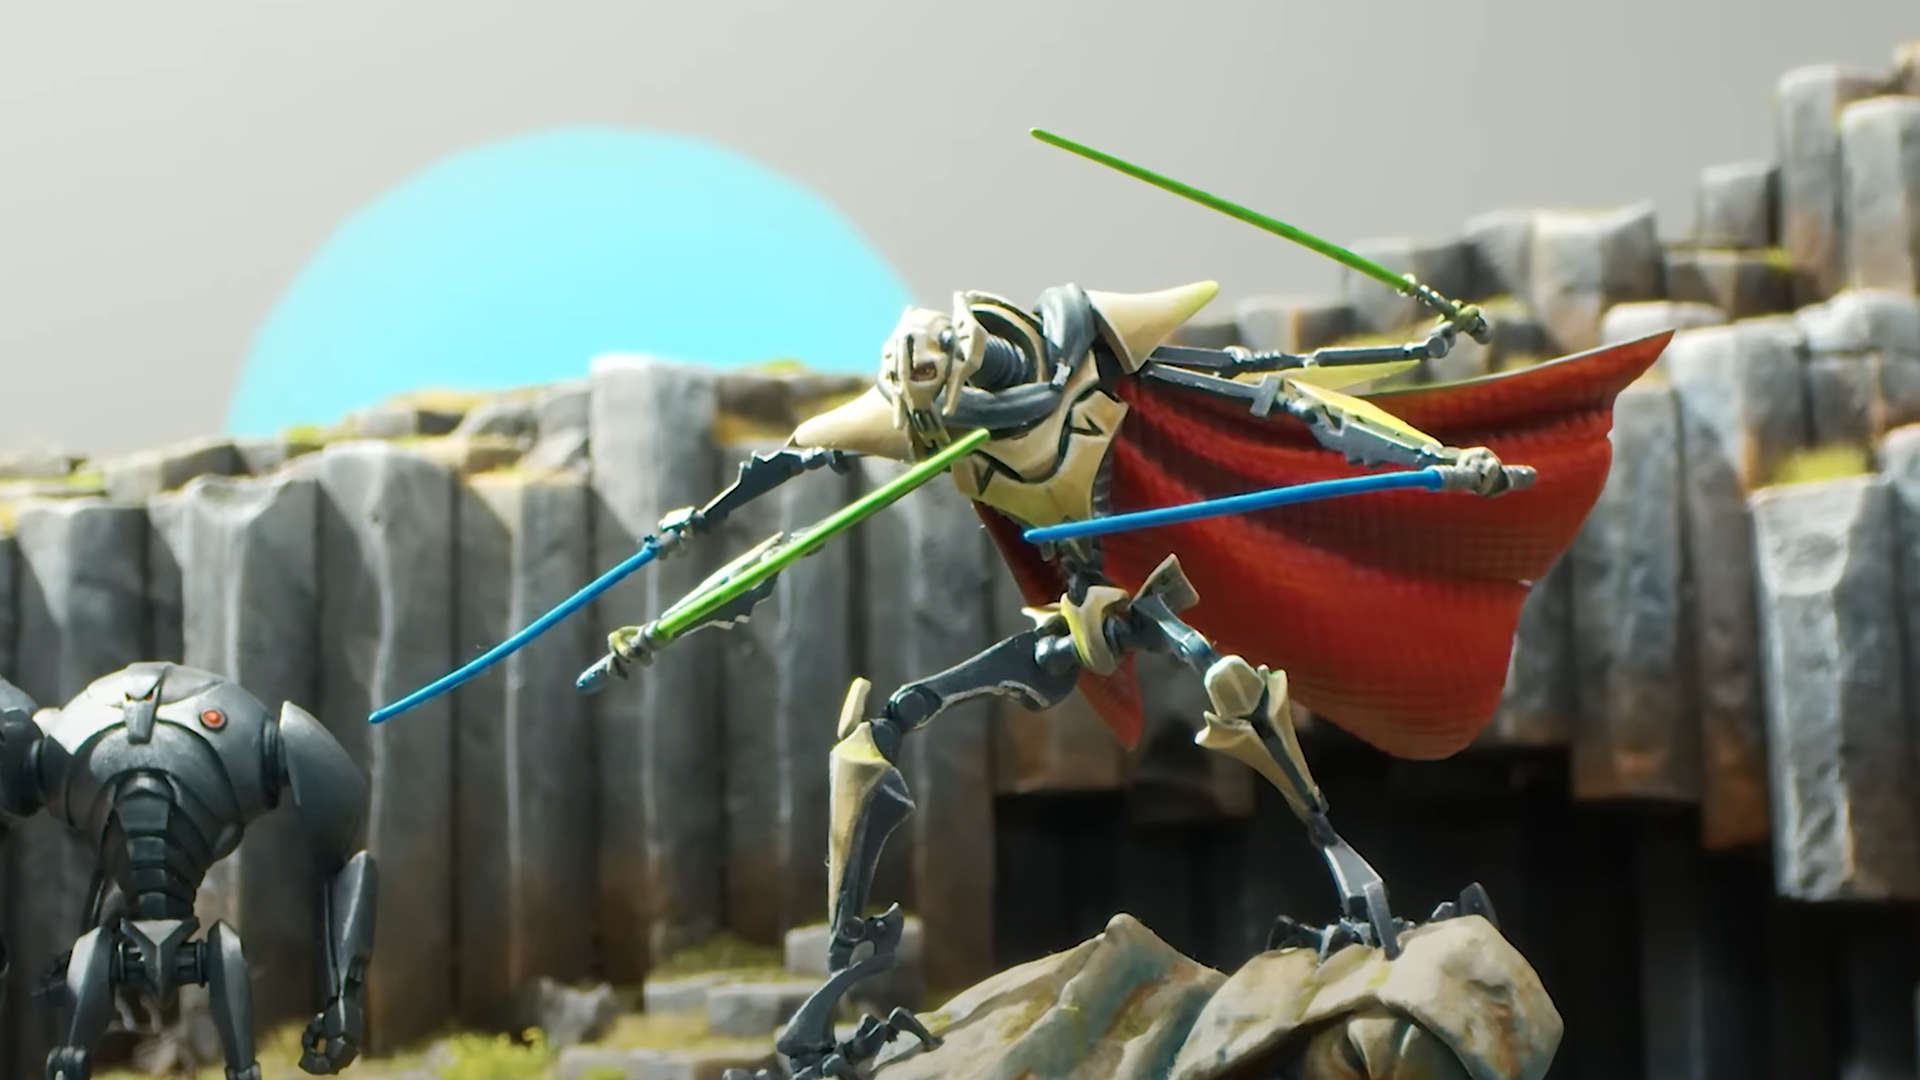 Star Wars Shatterpoint - models by Atomic Mass Games of General Grievous